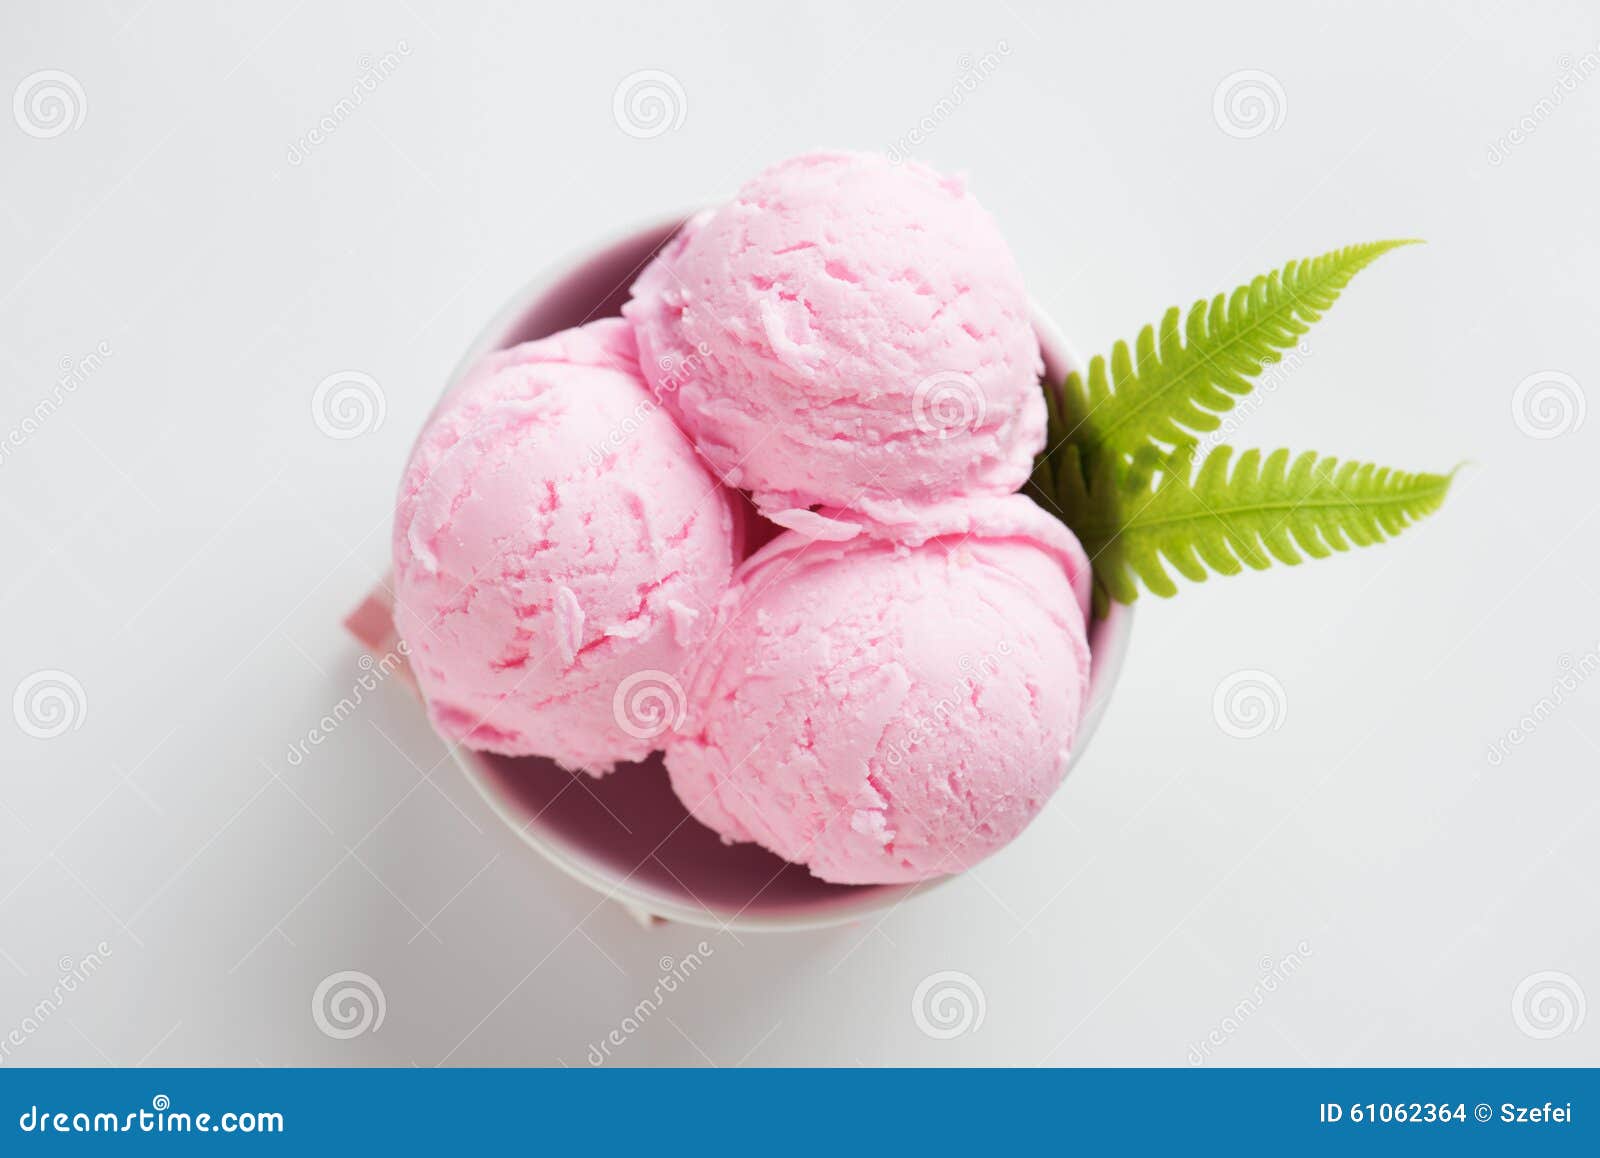 Top View Pink Ice Cream In Bowl Stock Photo - Image: 61062364